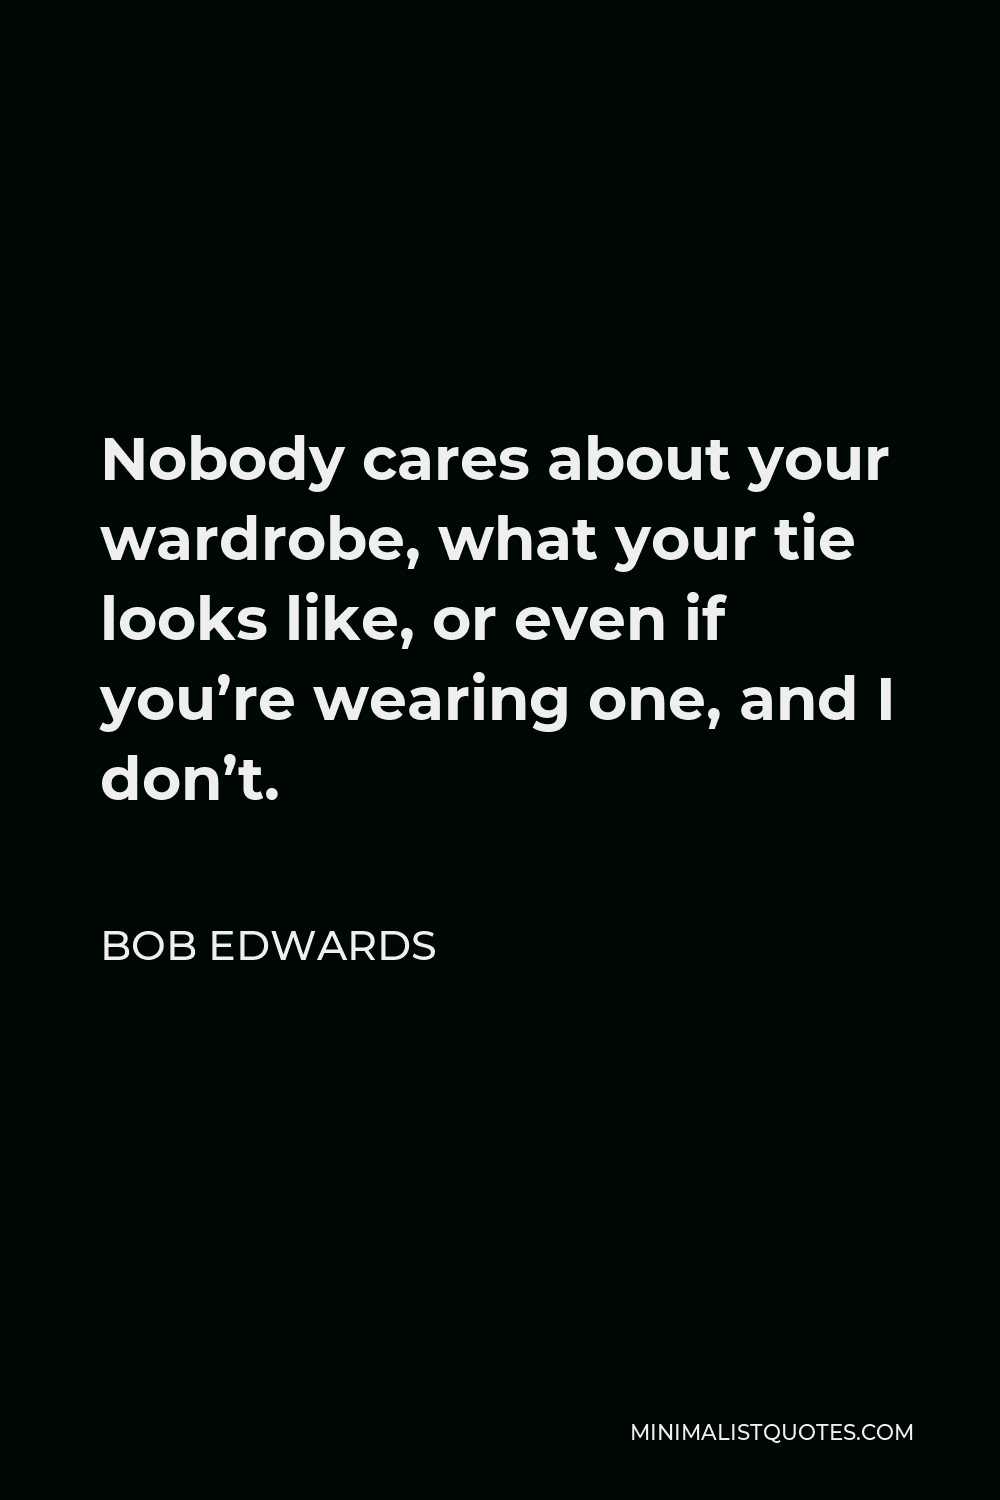 Bob Edwards Quote - Nobody cares about your wardrobe, what your tie looks like, or even if you’re wearing one, and I don’t.